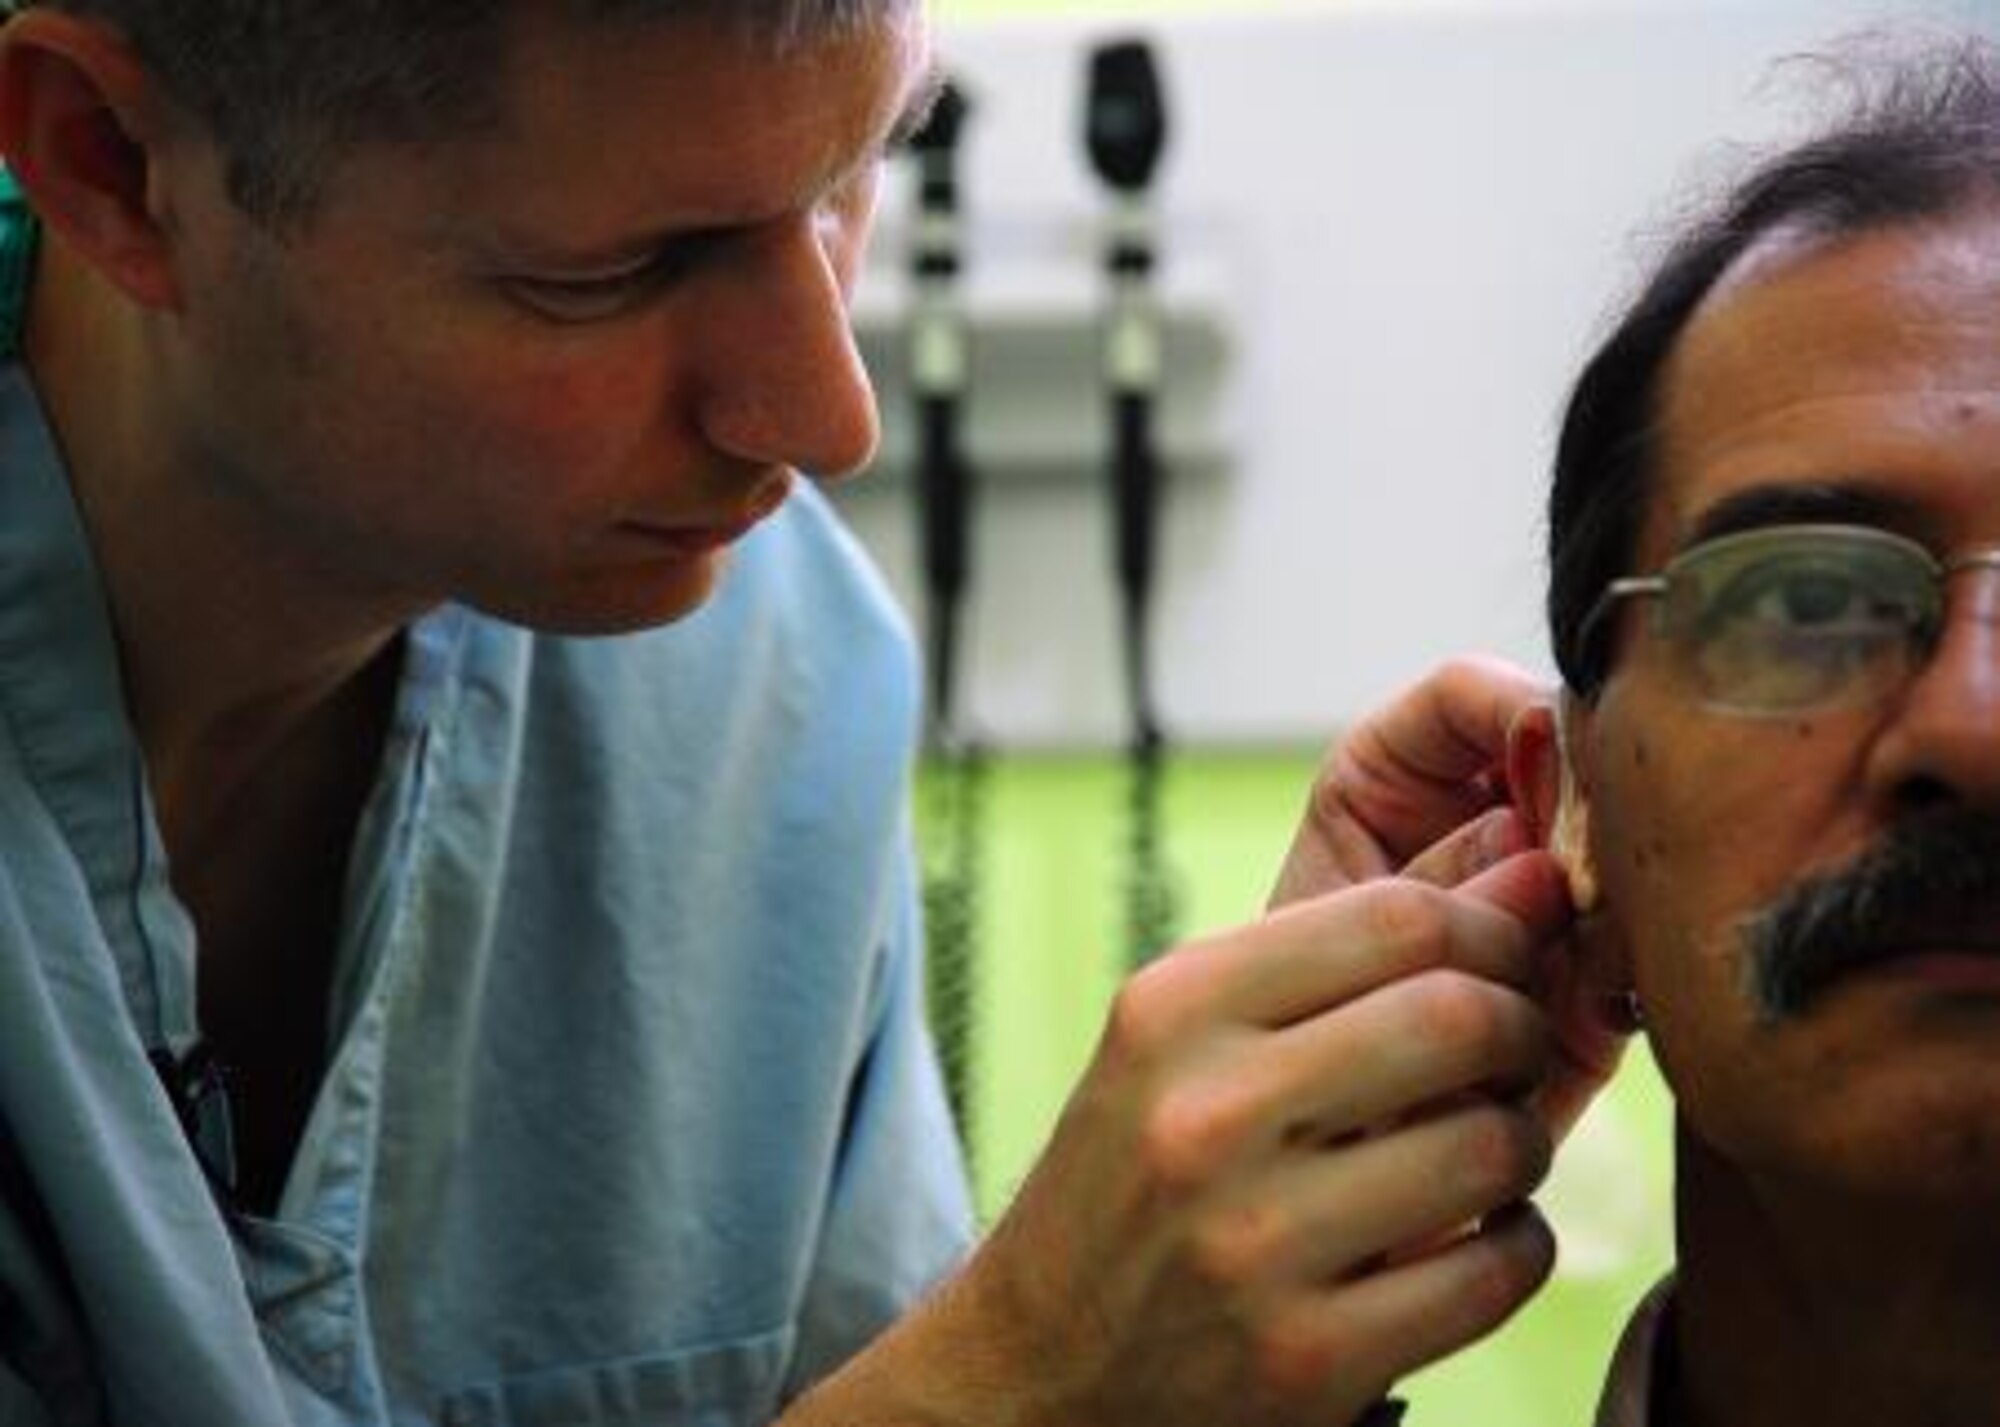 U.S. Air Force Capt. Quintin Hecht, audiologist from the 59th Surgical Specialty Squadron, Joint-Base San Antonio-Lackland, Texas, adjusts the fitting of a hearing aid on Cesar Alvarez during a surgery medical readiness training exercise at Western Regional Hospital in Belmopan, Belize, April 24, 2013. Medical professionals from the U.S. are providing free medical treatment at multiple medical readiness training exercises throughout Belize as part of an exercise known as New Horizons. The MEDRETES are designed to provide humanitarian assistance and medical care to people in several communities, while helping improve the skills of U.S. military medical forces. (U.S. Air Force photo by Tech Sgt. Tony Tolley/Released)